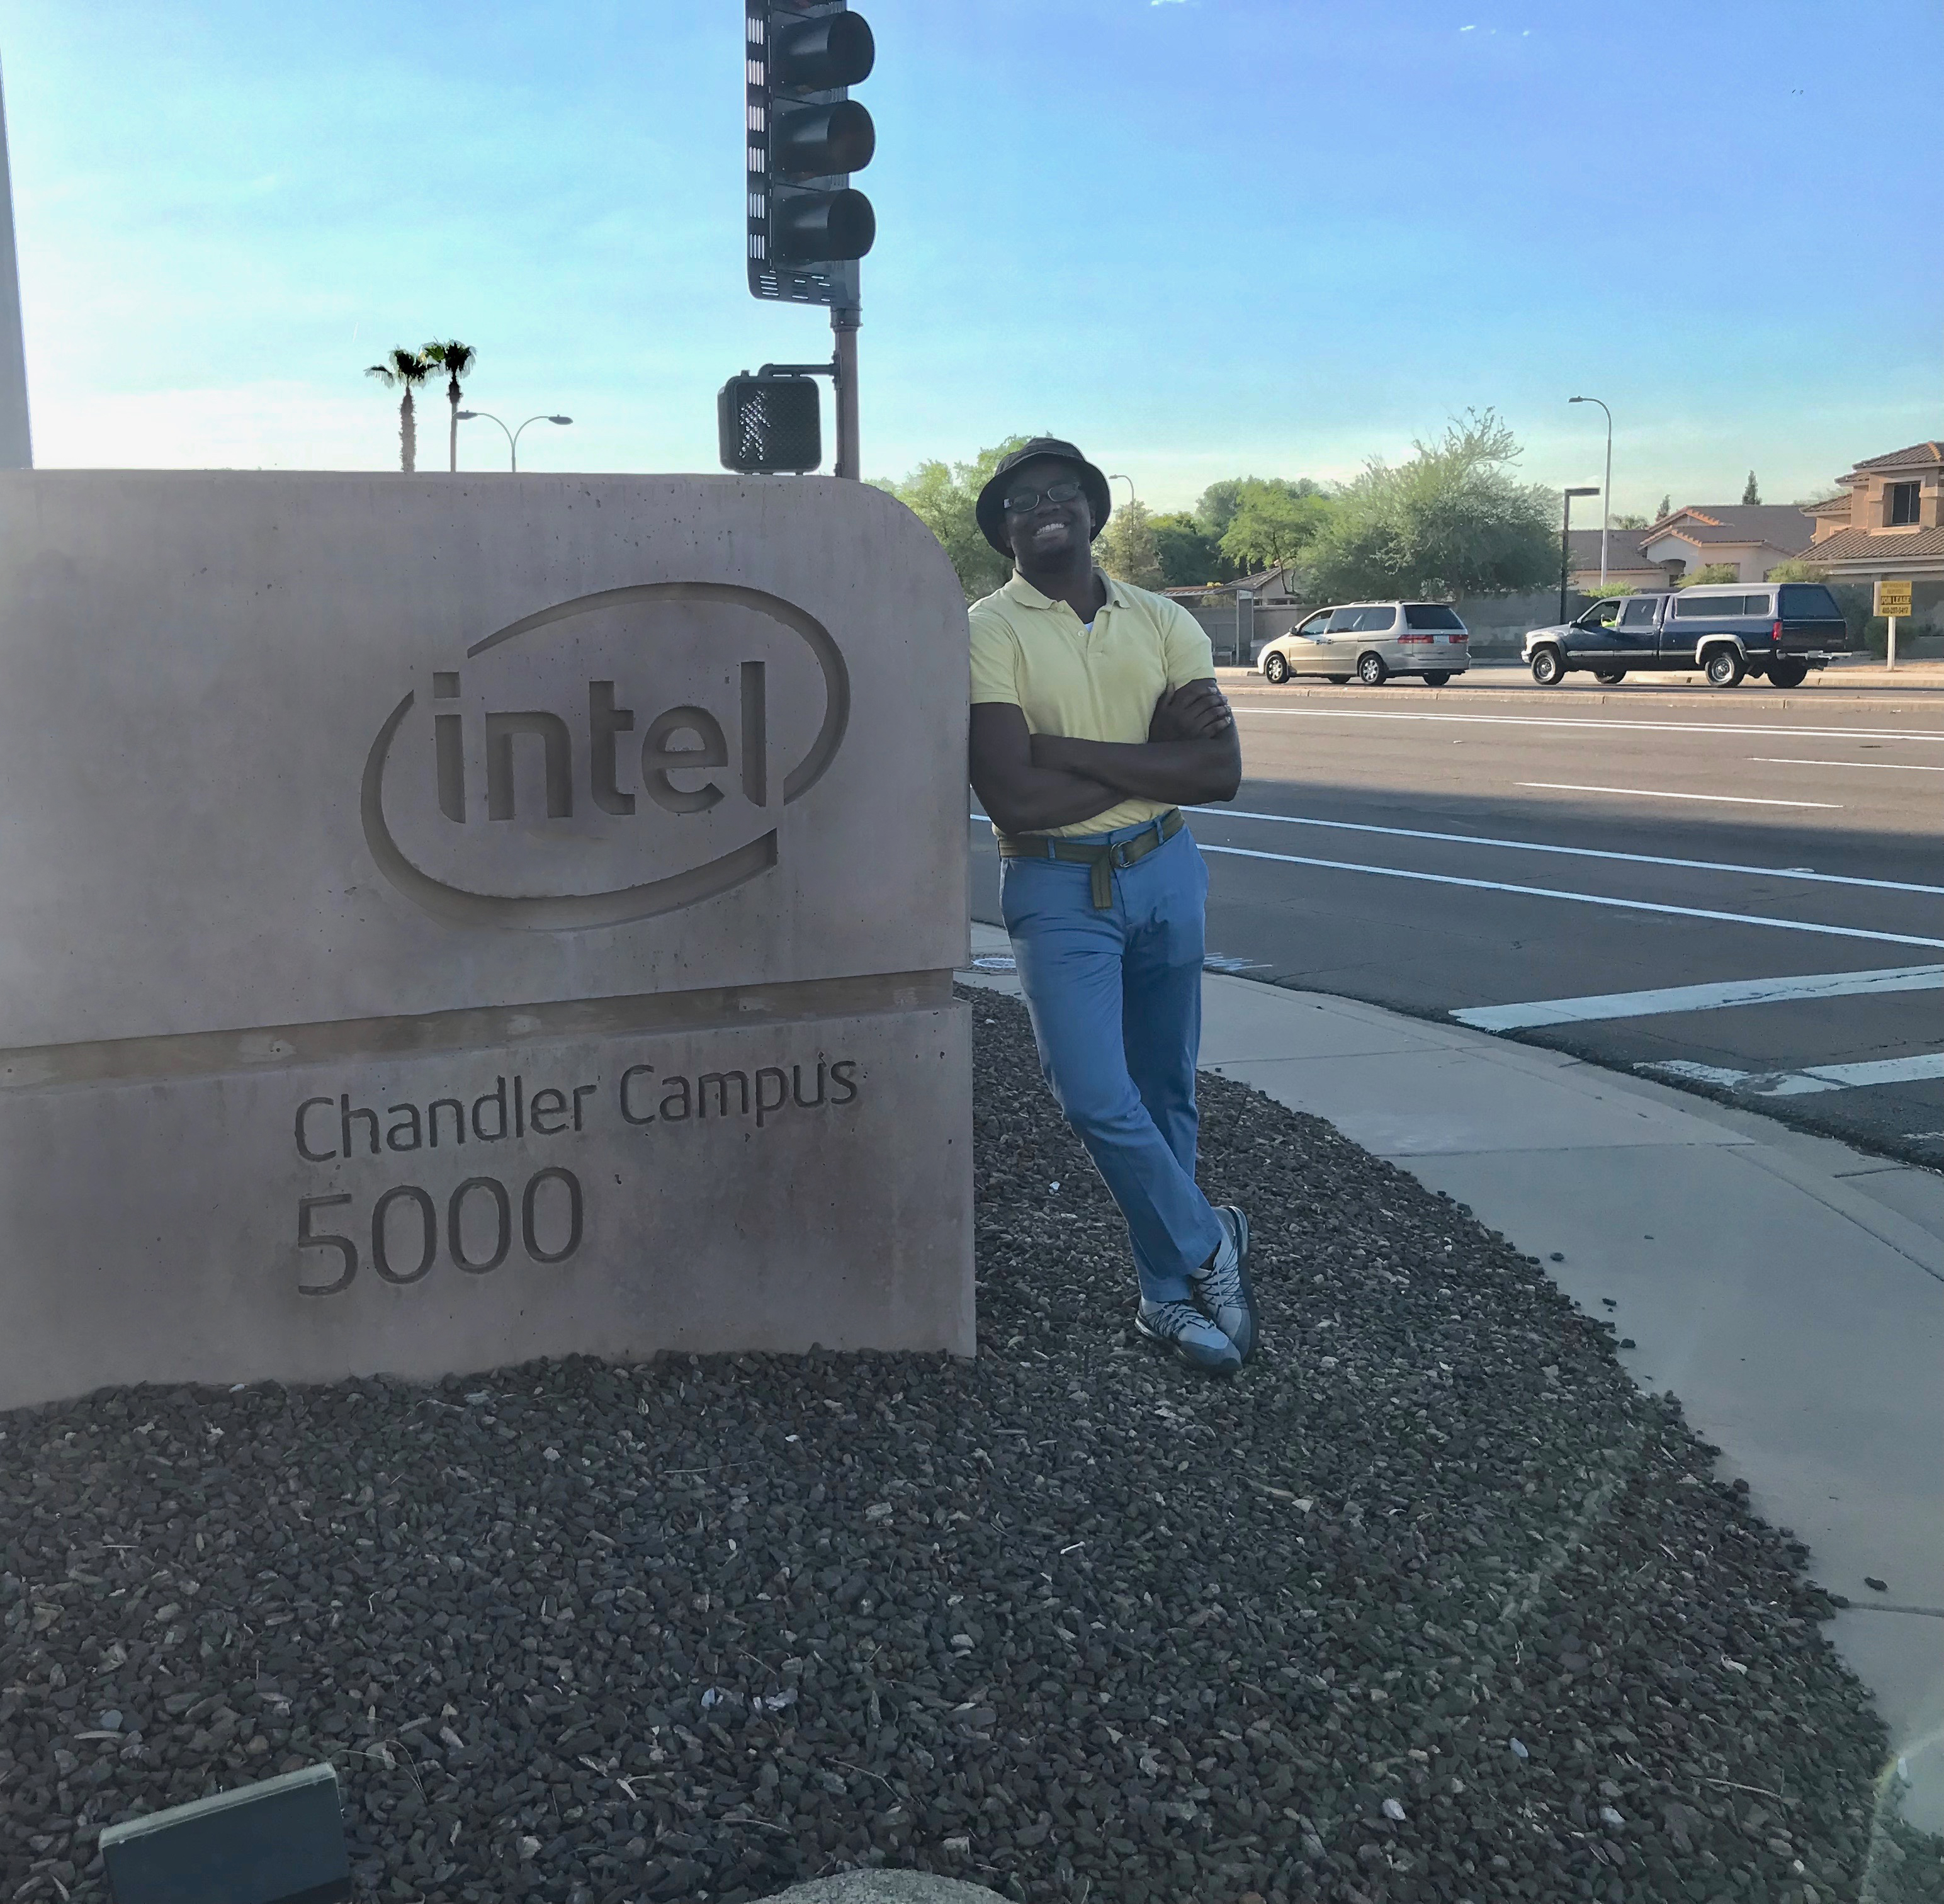 Ossie Douglas stands in front of Intel's Chandler campus sign